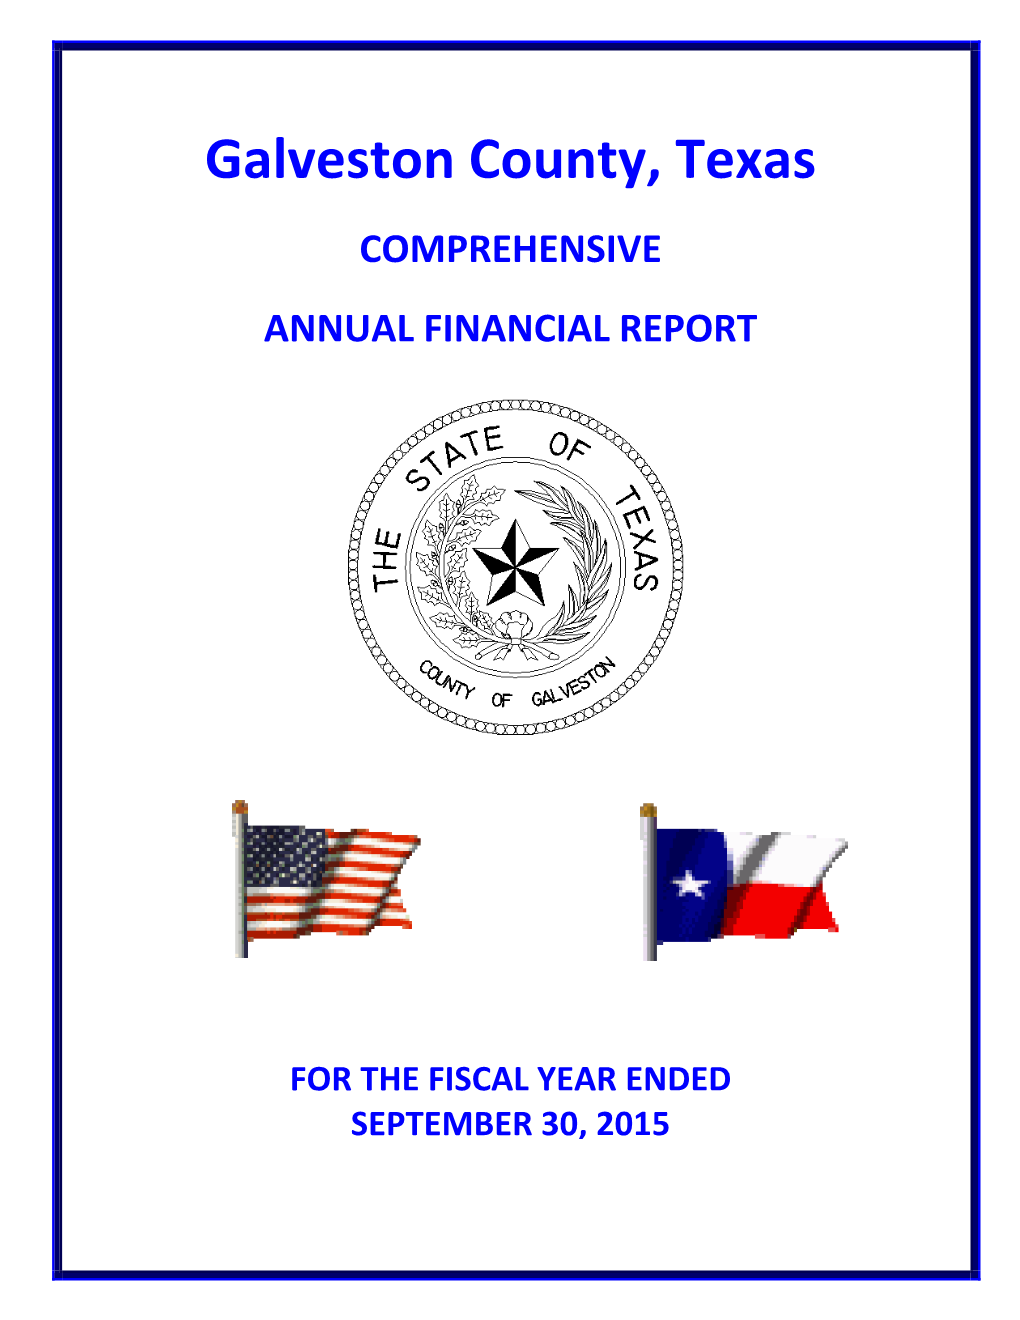 Comprehensive Annual Financial Report for 2015